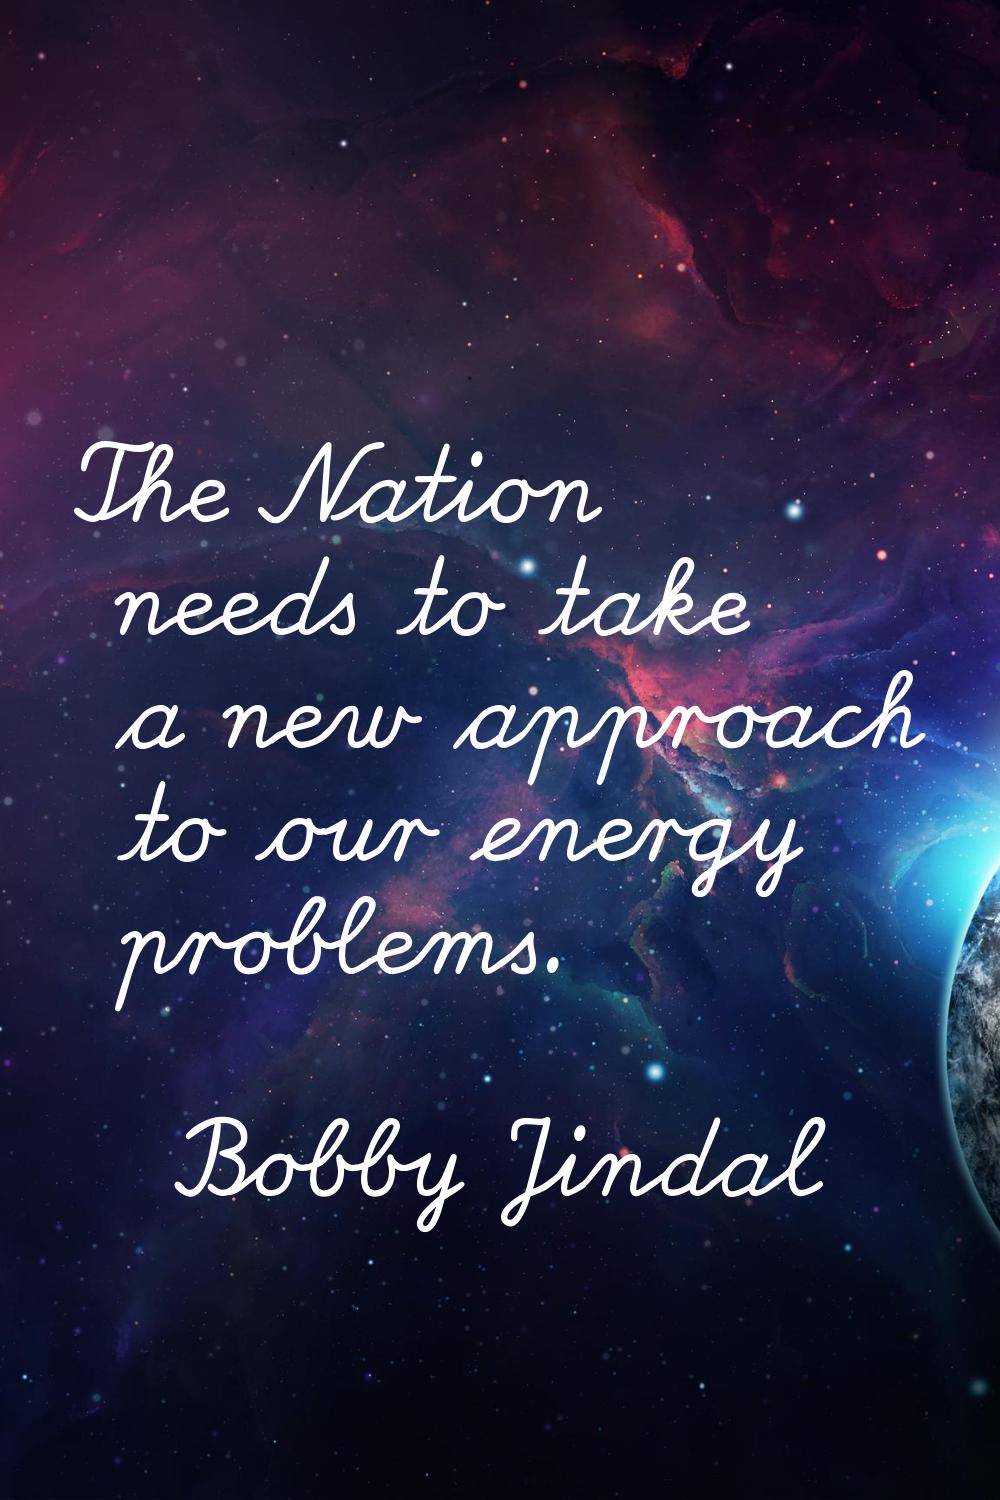 The Nation needs to take a new approach to our energy problems.